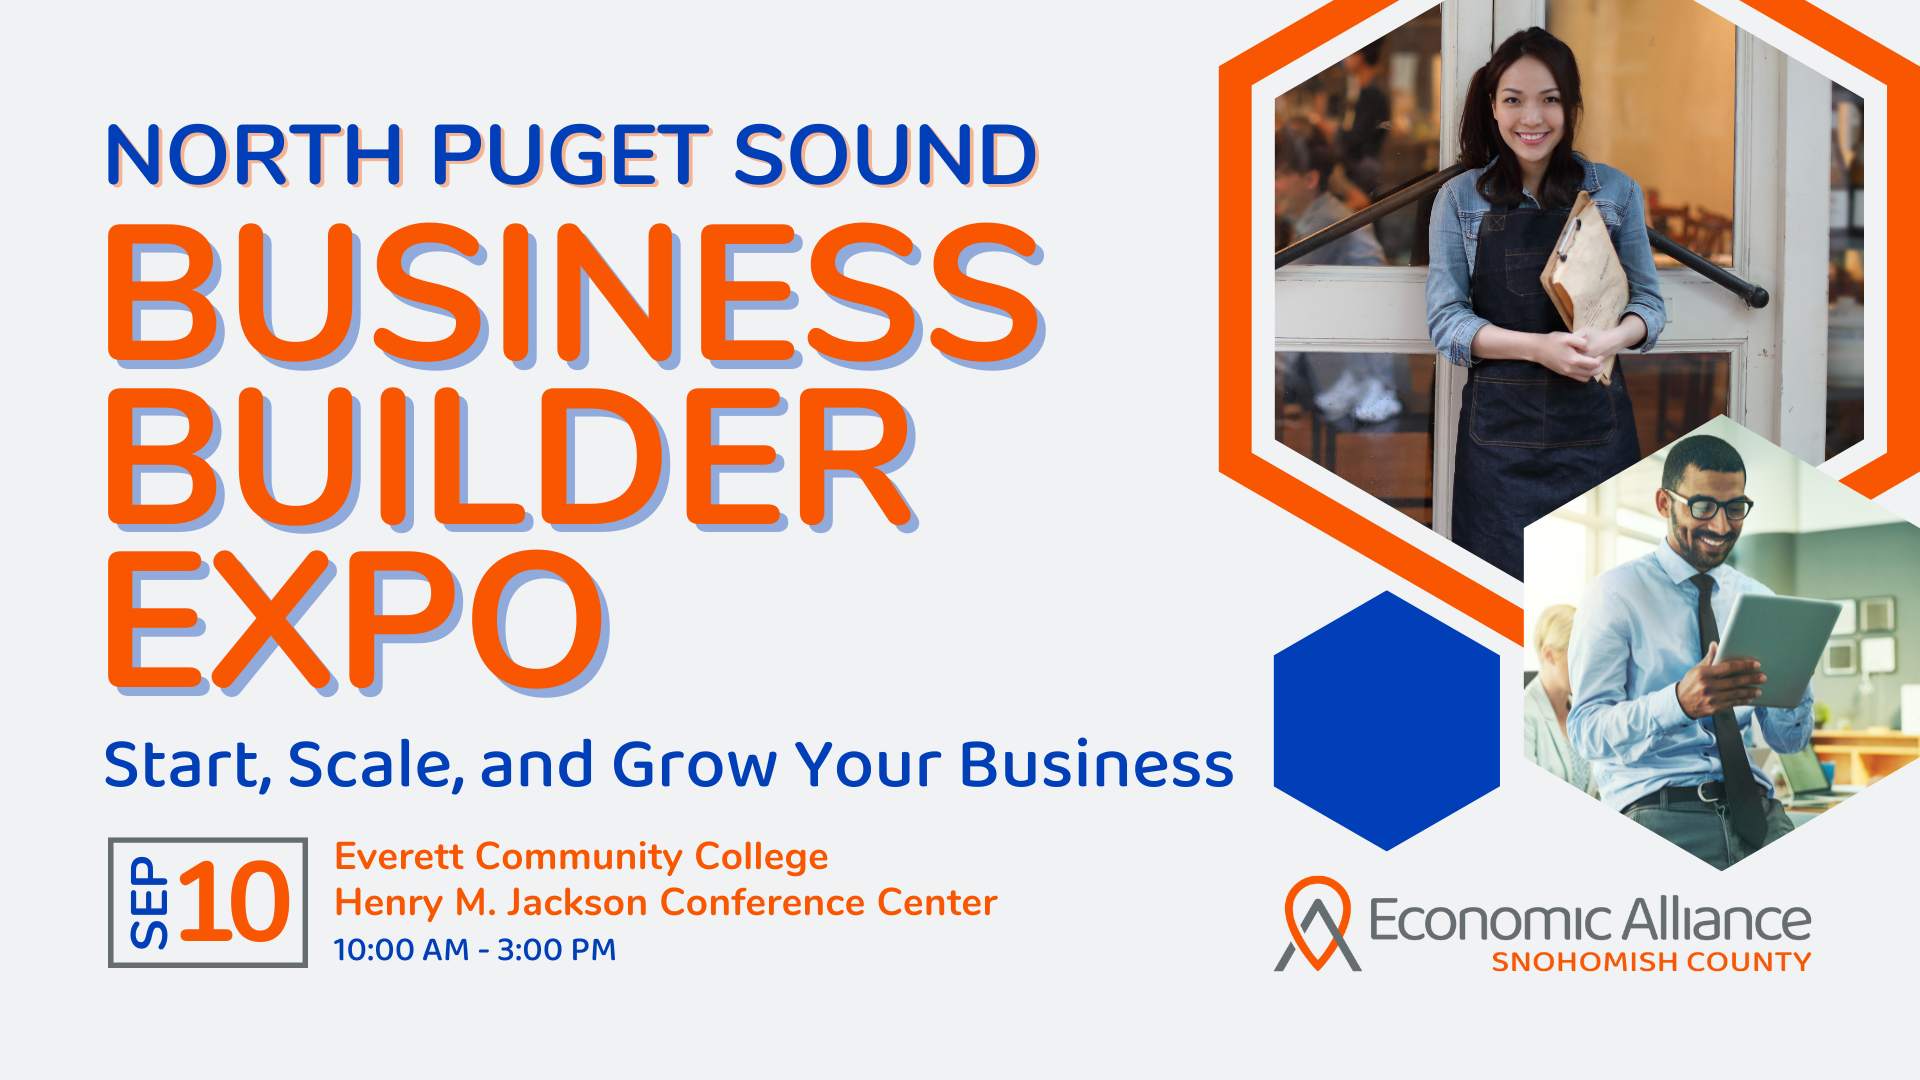 North Puget Sound Business Builder Expo Photo